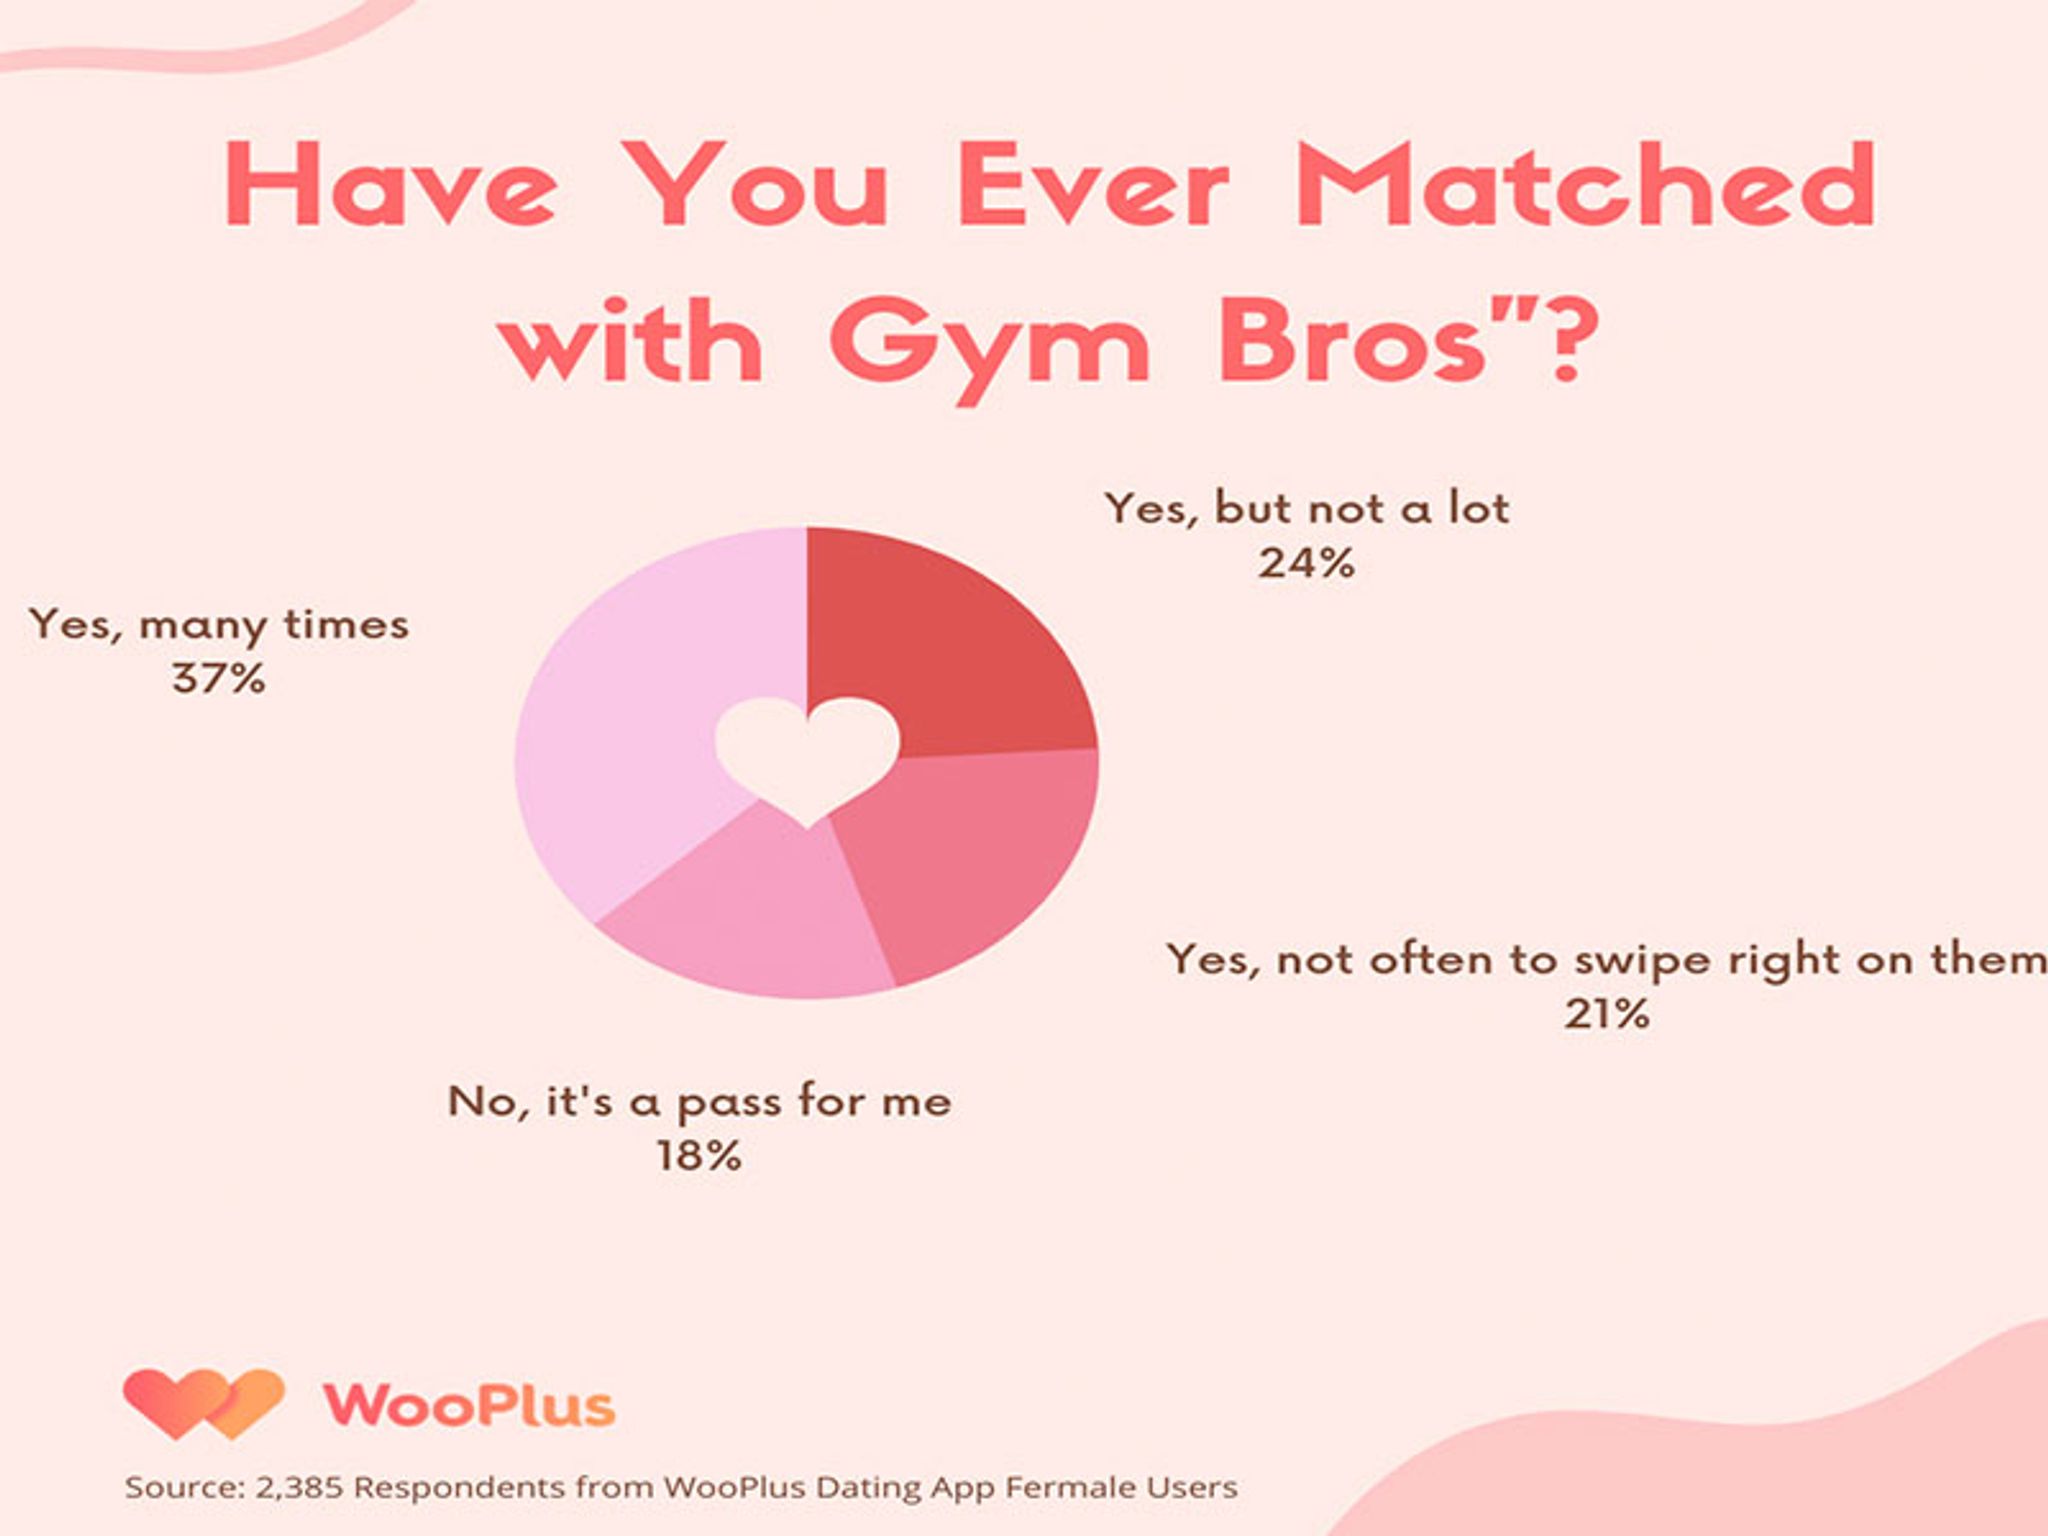 Dating App Survey Finds Plus-Size Girls Are Attractive to Ripped Gym Bros